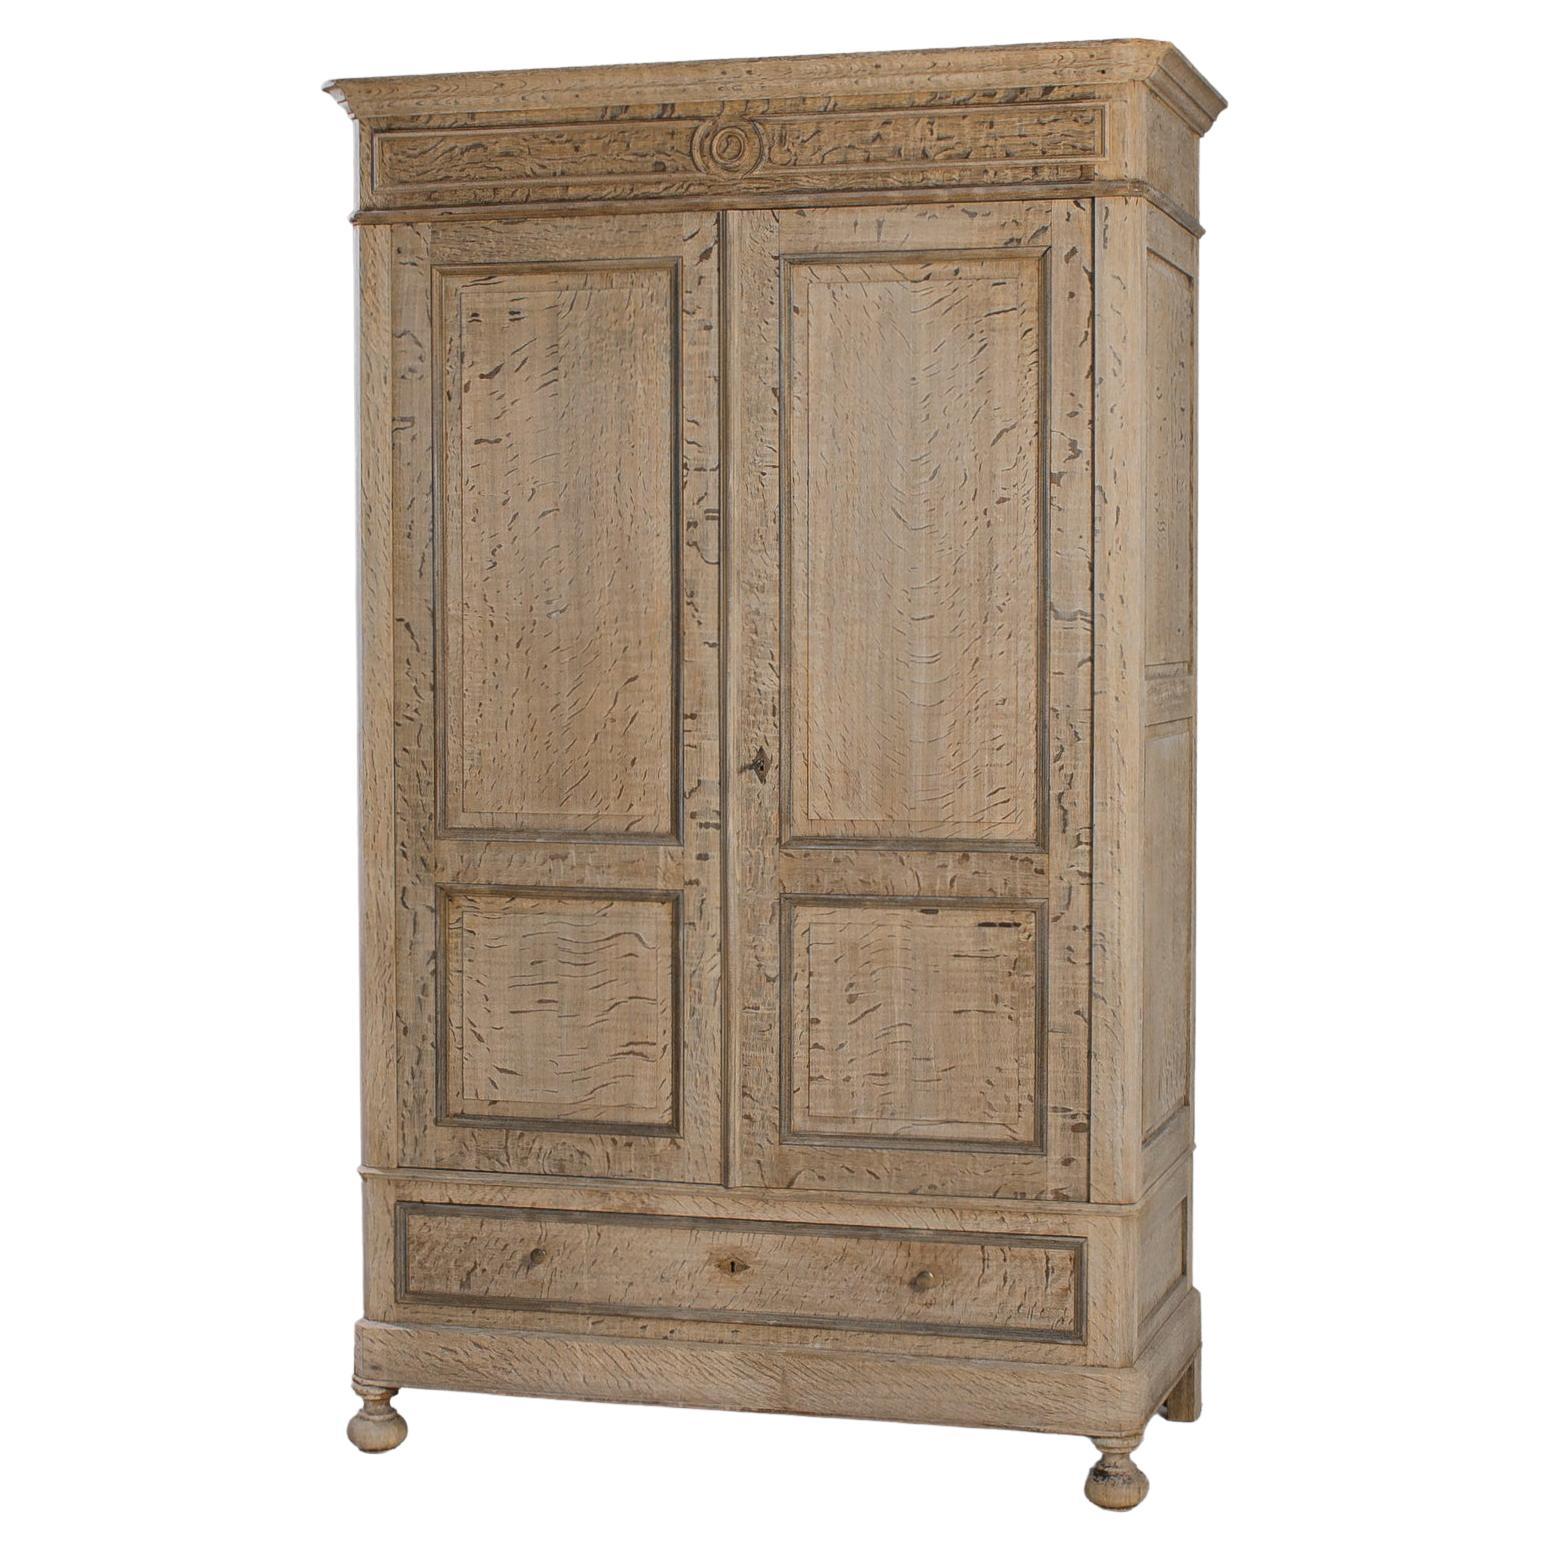 1880s French Bleached Oak Armoire